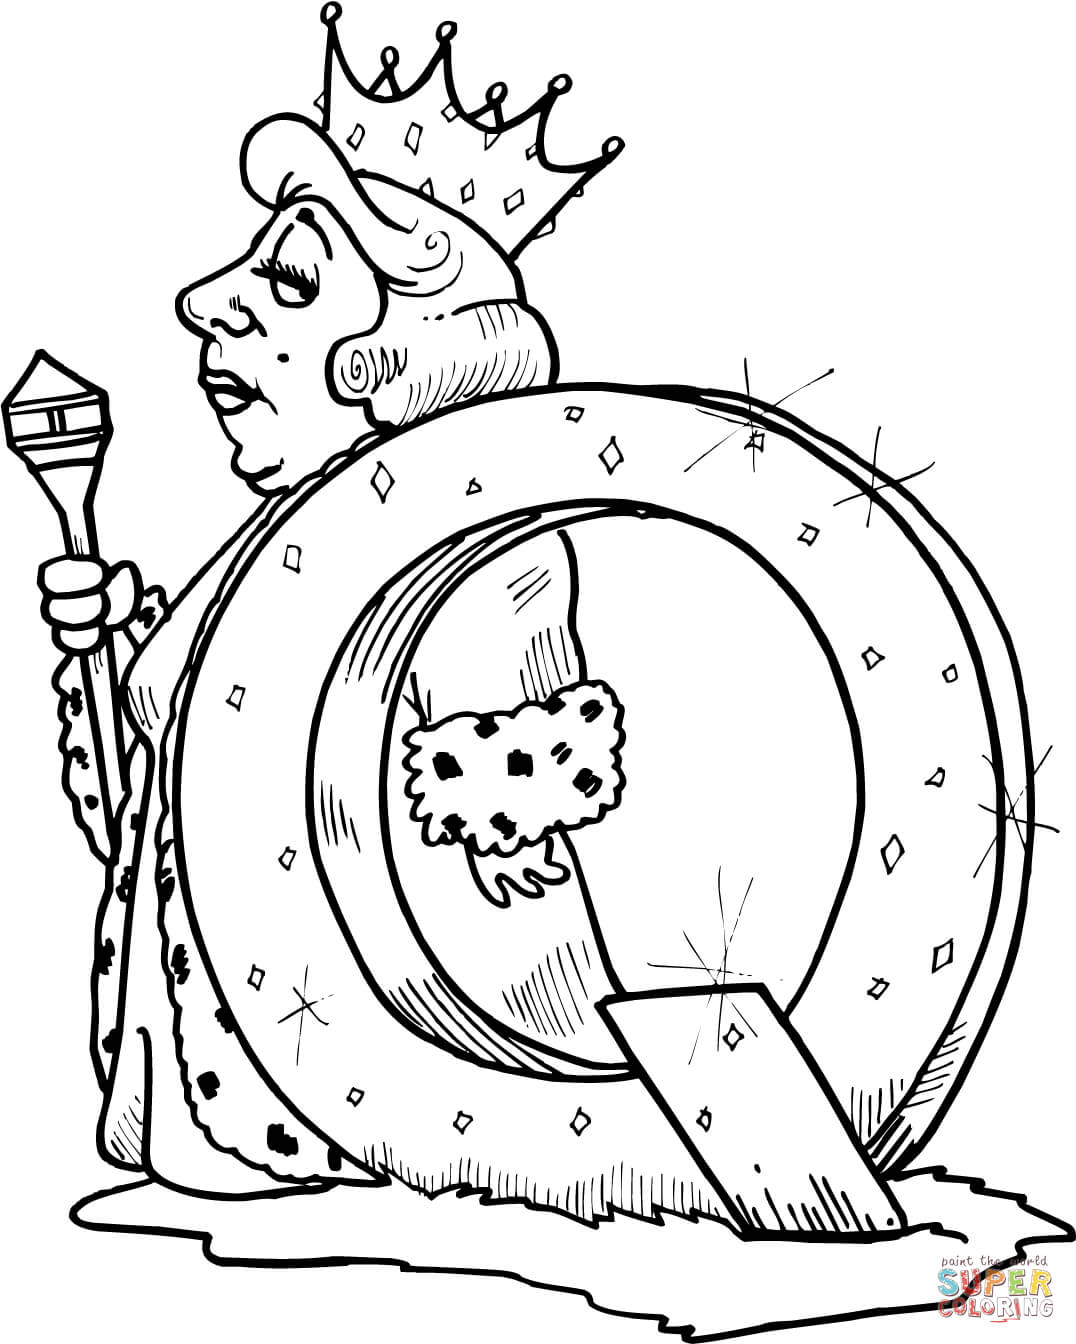 Letter Q is for Queen coloring page | Free Printable Coloring Pages